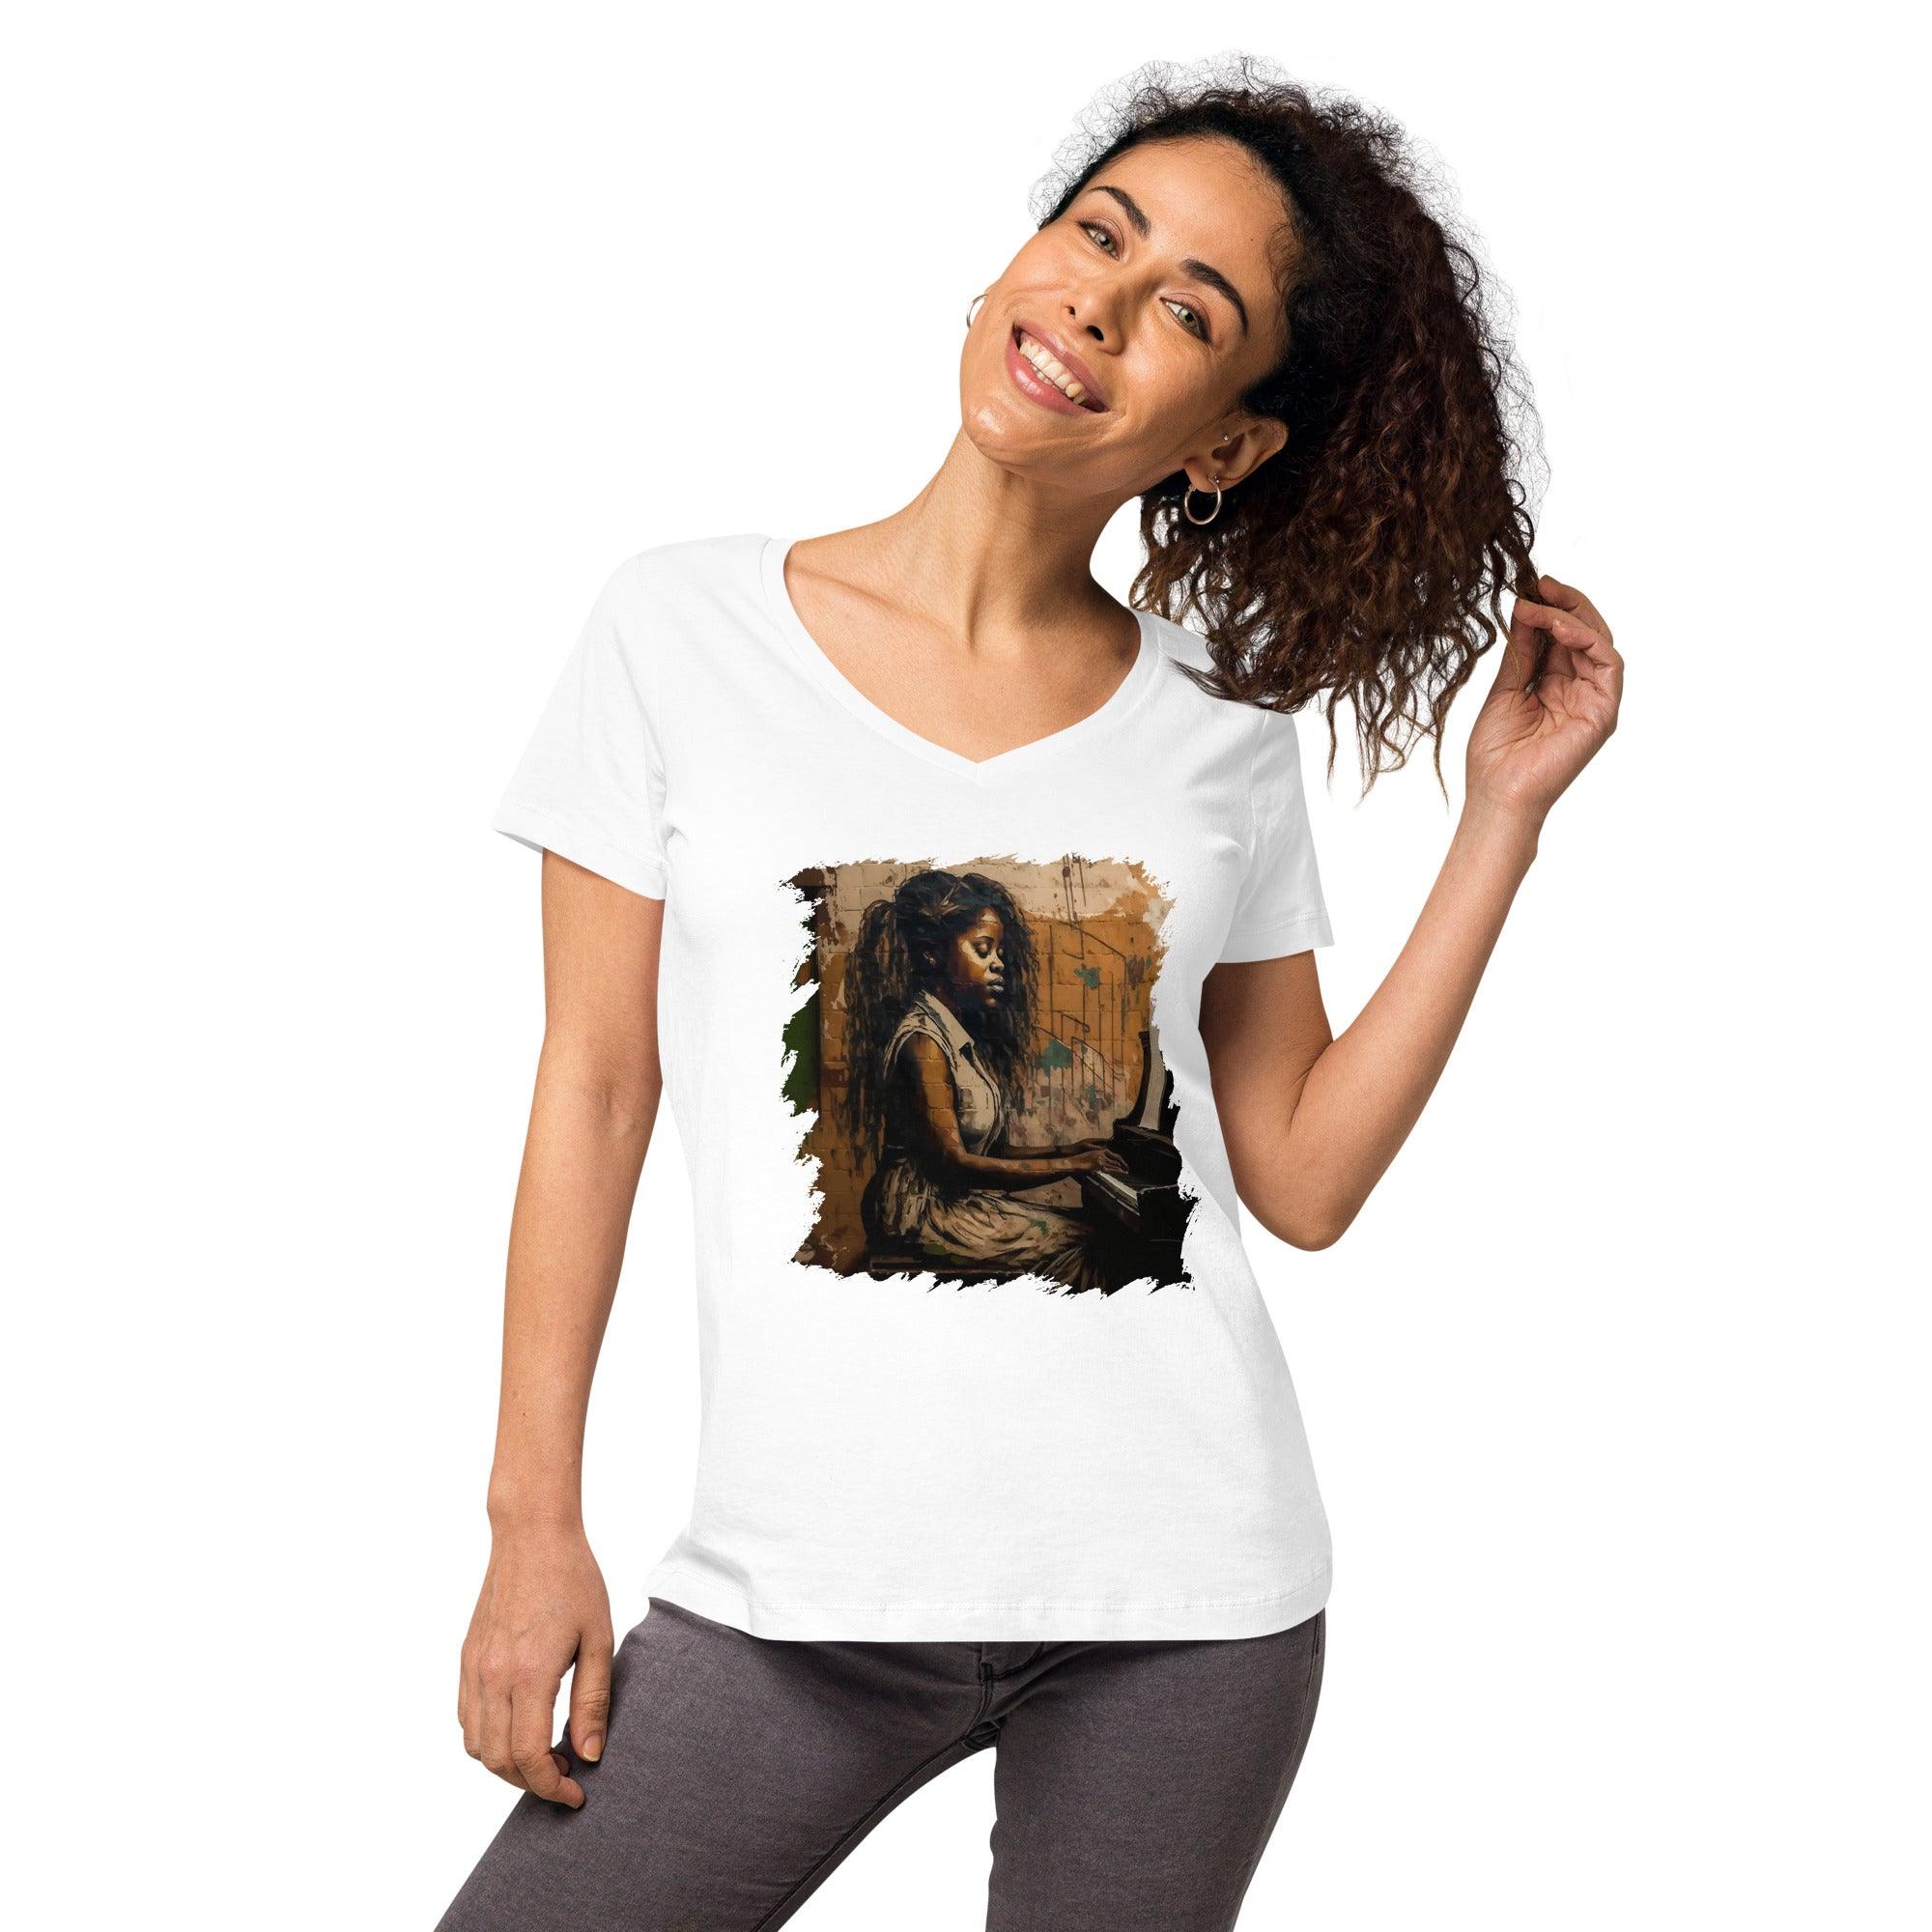 She Makes Keys Sing Women’s Fitted V-neck T-shirt - Beyond T-shirts